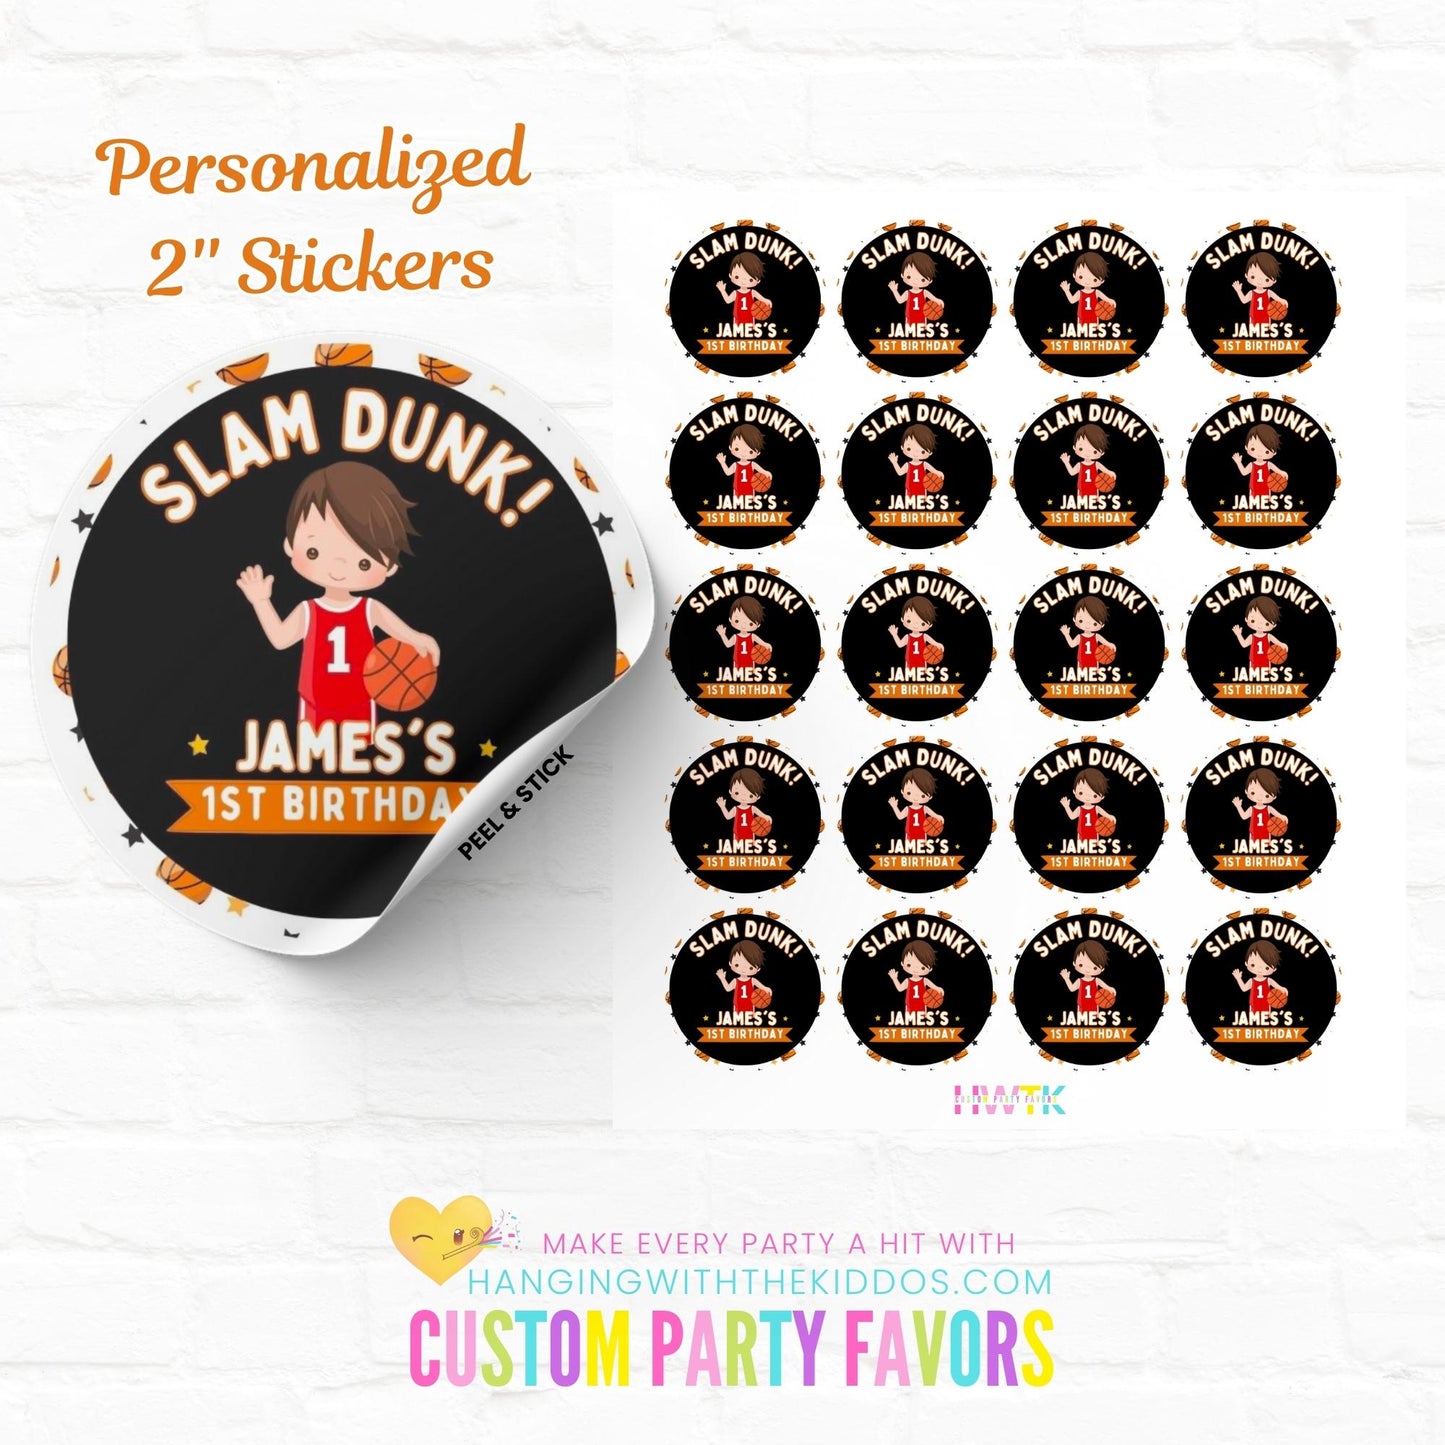 Basketball Party Slam Dunk 2" Personalized Round Stickers